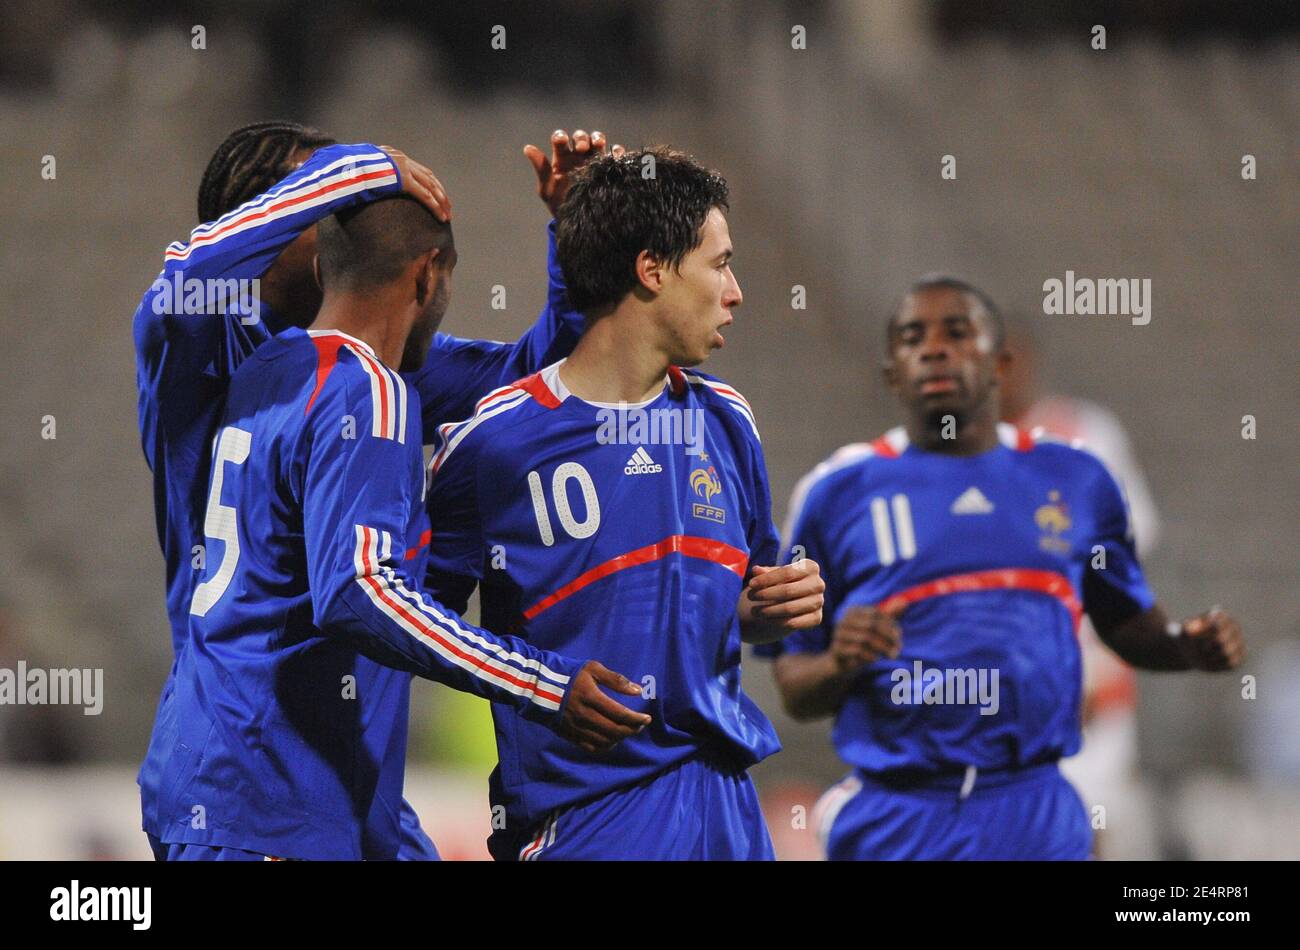 (L-R) France's Florent Sinama Pongolle, Jimmy Briand, Samir Nasri and Rio Antonio Mavuba celebrate the first goal during the friendly soccer match, France A' vs Mali at the Charlety stadium in Paris, France on March 25, 2008. France defeats Mali 3-2. Photo by Steeve McMay/Cameleon/ABACAPRESS.COM Stock Photo